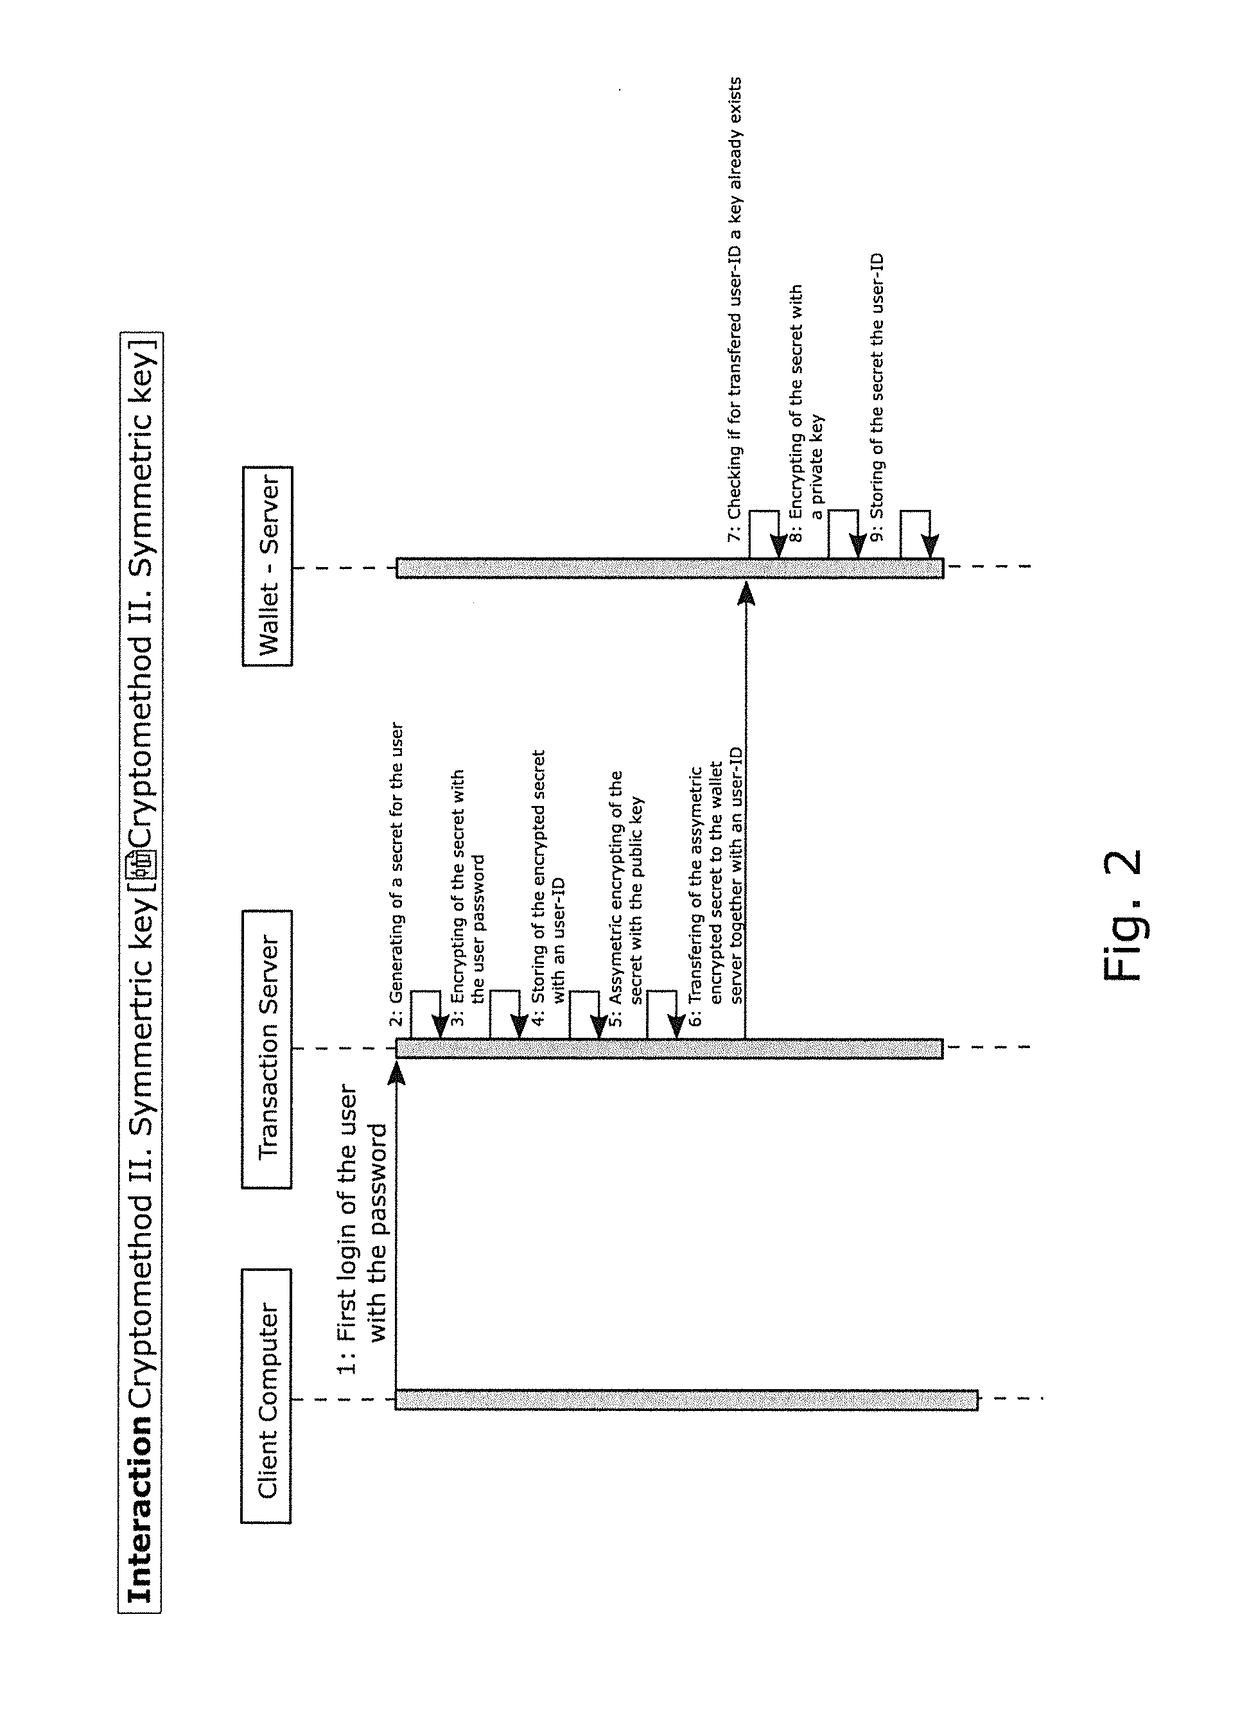 Method and device for protecting access to wallets in which crypto currencies are stored